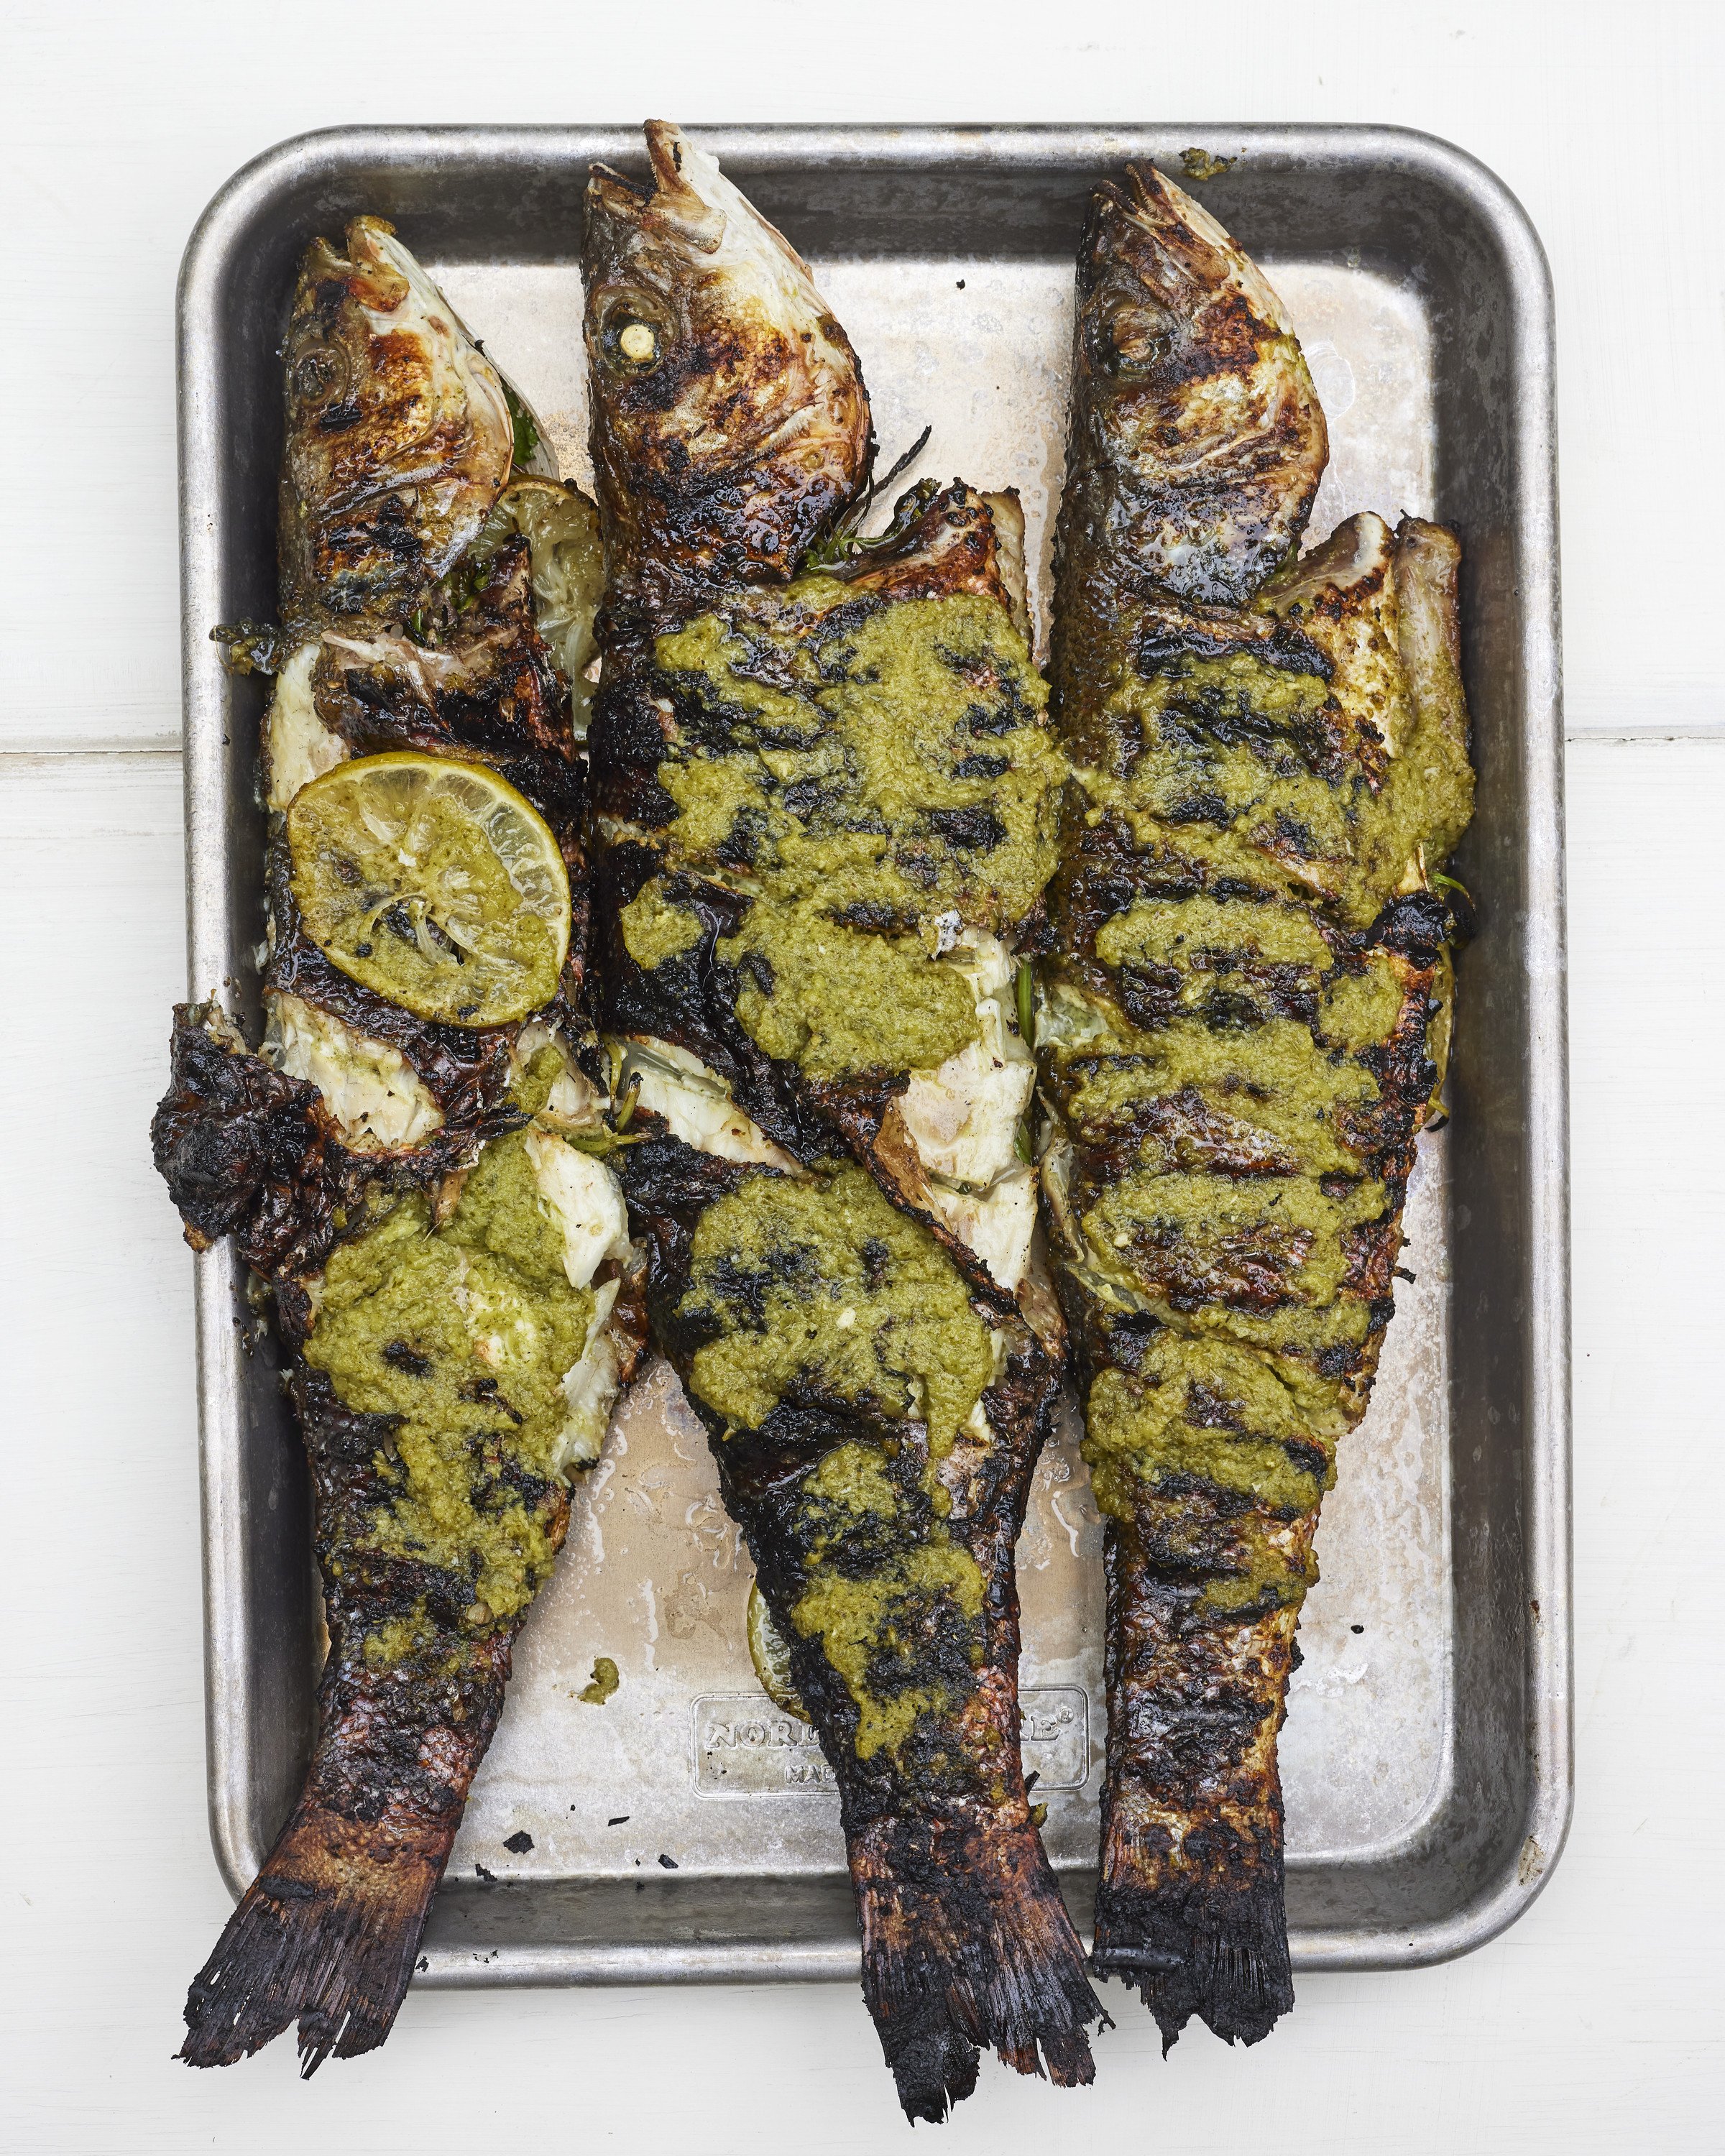 SPICE_GRILLED_FISH_4_f.jpg